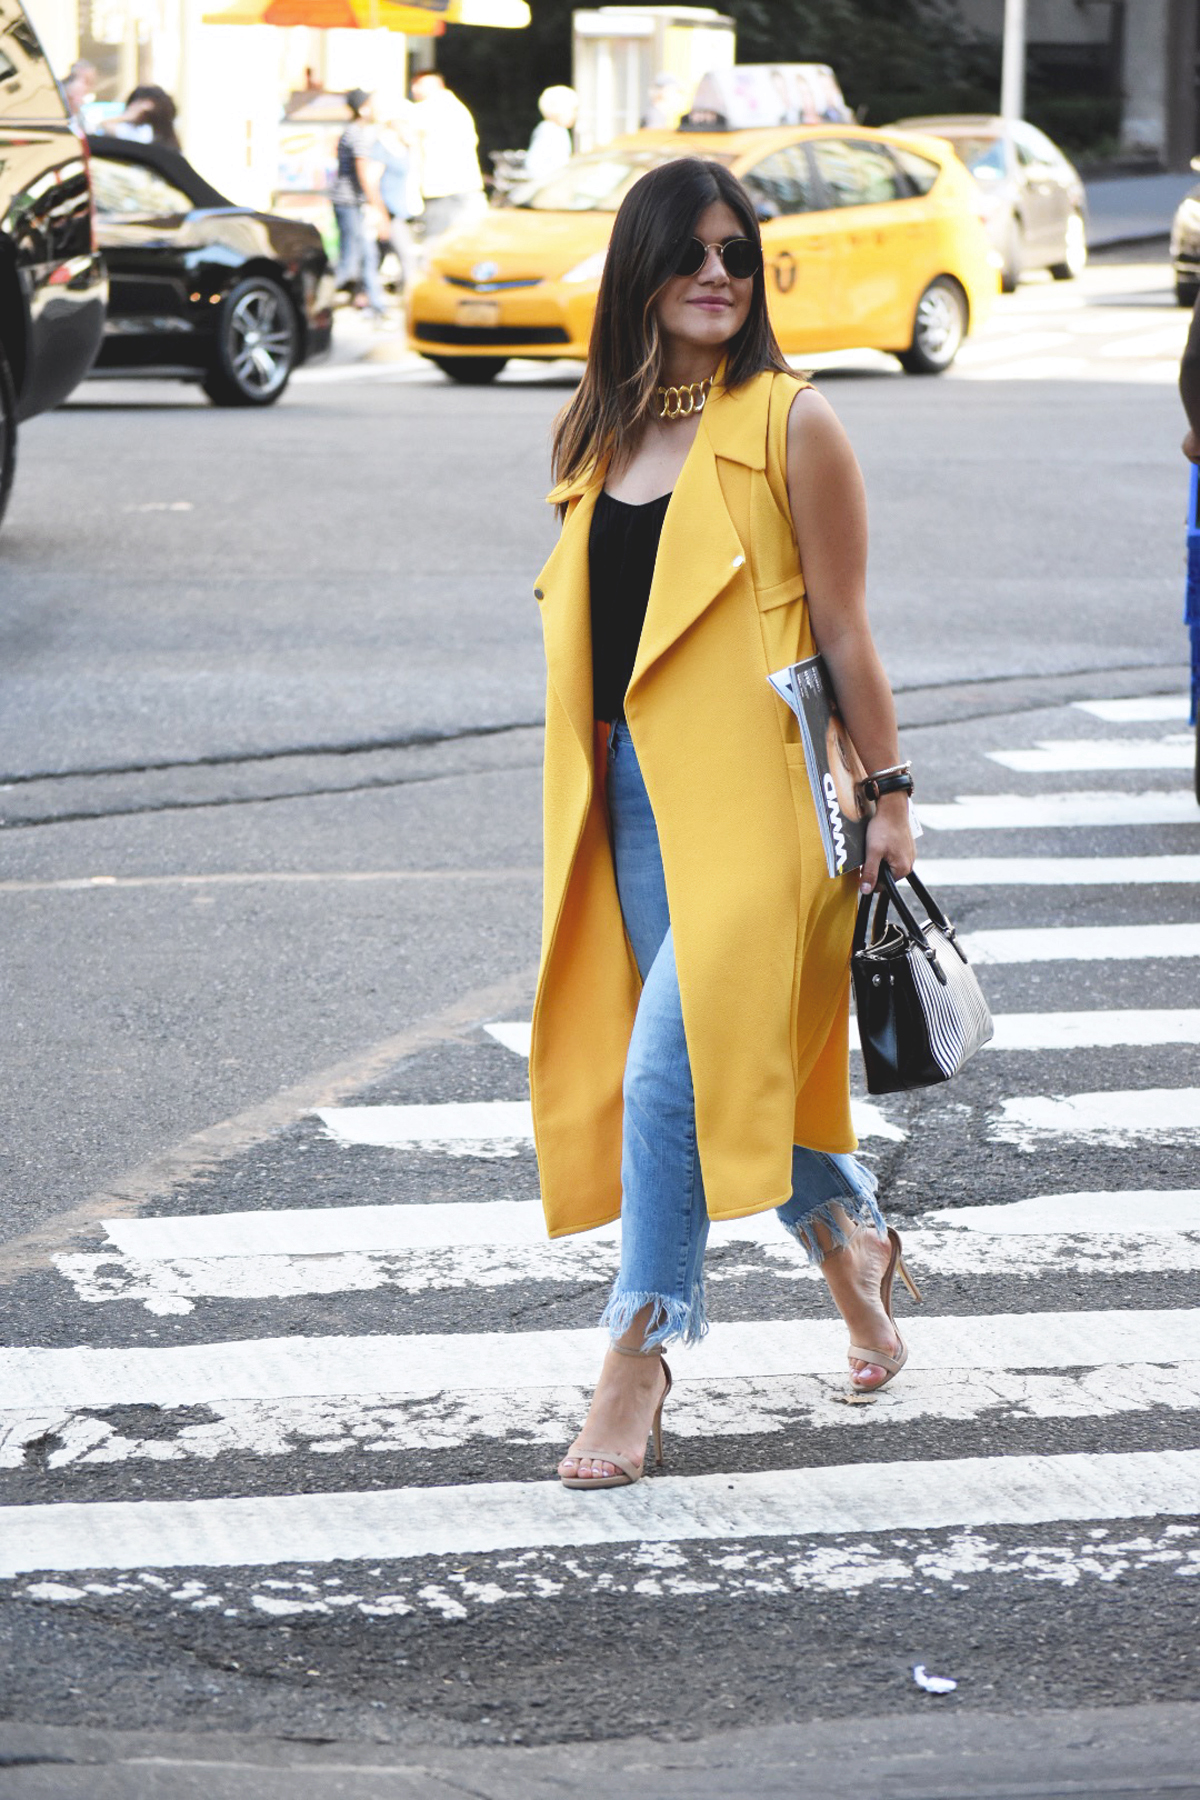 Carolina Hellal of Chic Talk wearing a Shein yellow maxi vest, Top shop fringed hem jeans, Rayban rounded sunglasses, Ralph Lauren striped bag, and Steve Madden beige strap sandals